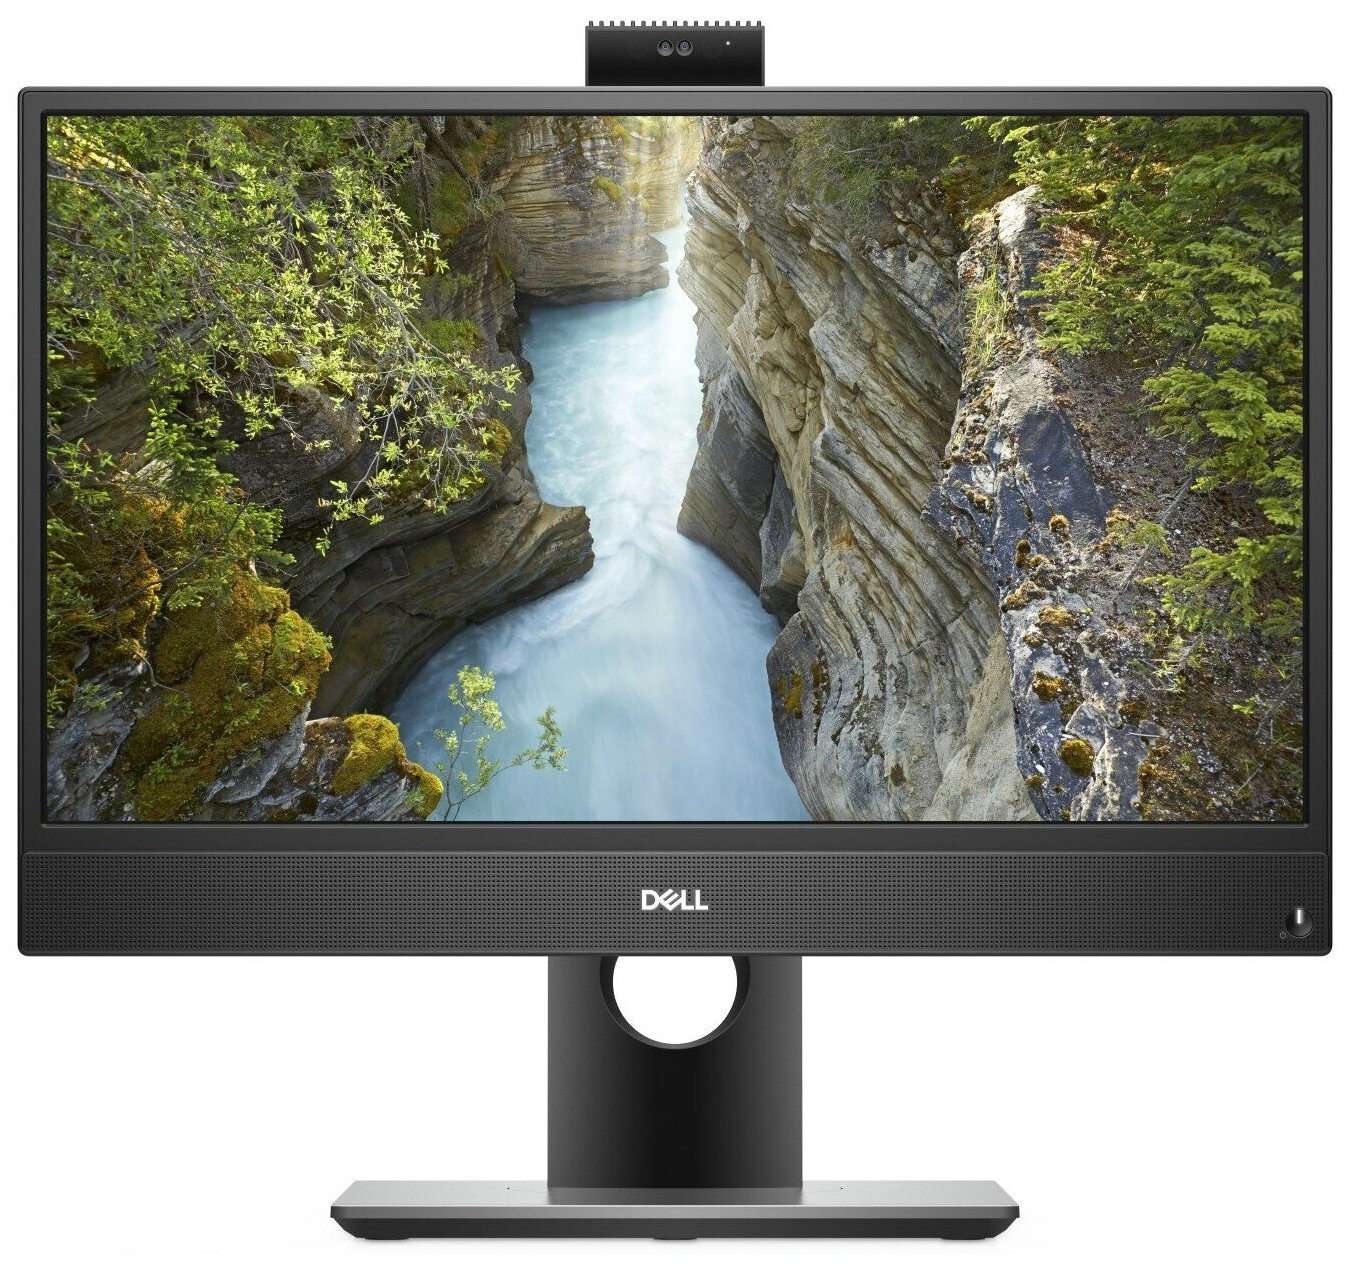 Пк Dell Optiplex 3280-6611 AIO Core i5-10500T (2,3GHz) 21,5'' FullHD (1920x1080) IPS AG Non-Touch 8GB (1x8GB) DDR4 256GB SSD Intel UHD 630 Height Adjustable Stand, TPM W10 Pro 3y NBD